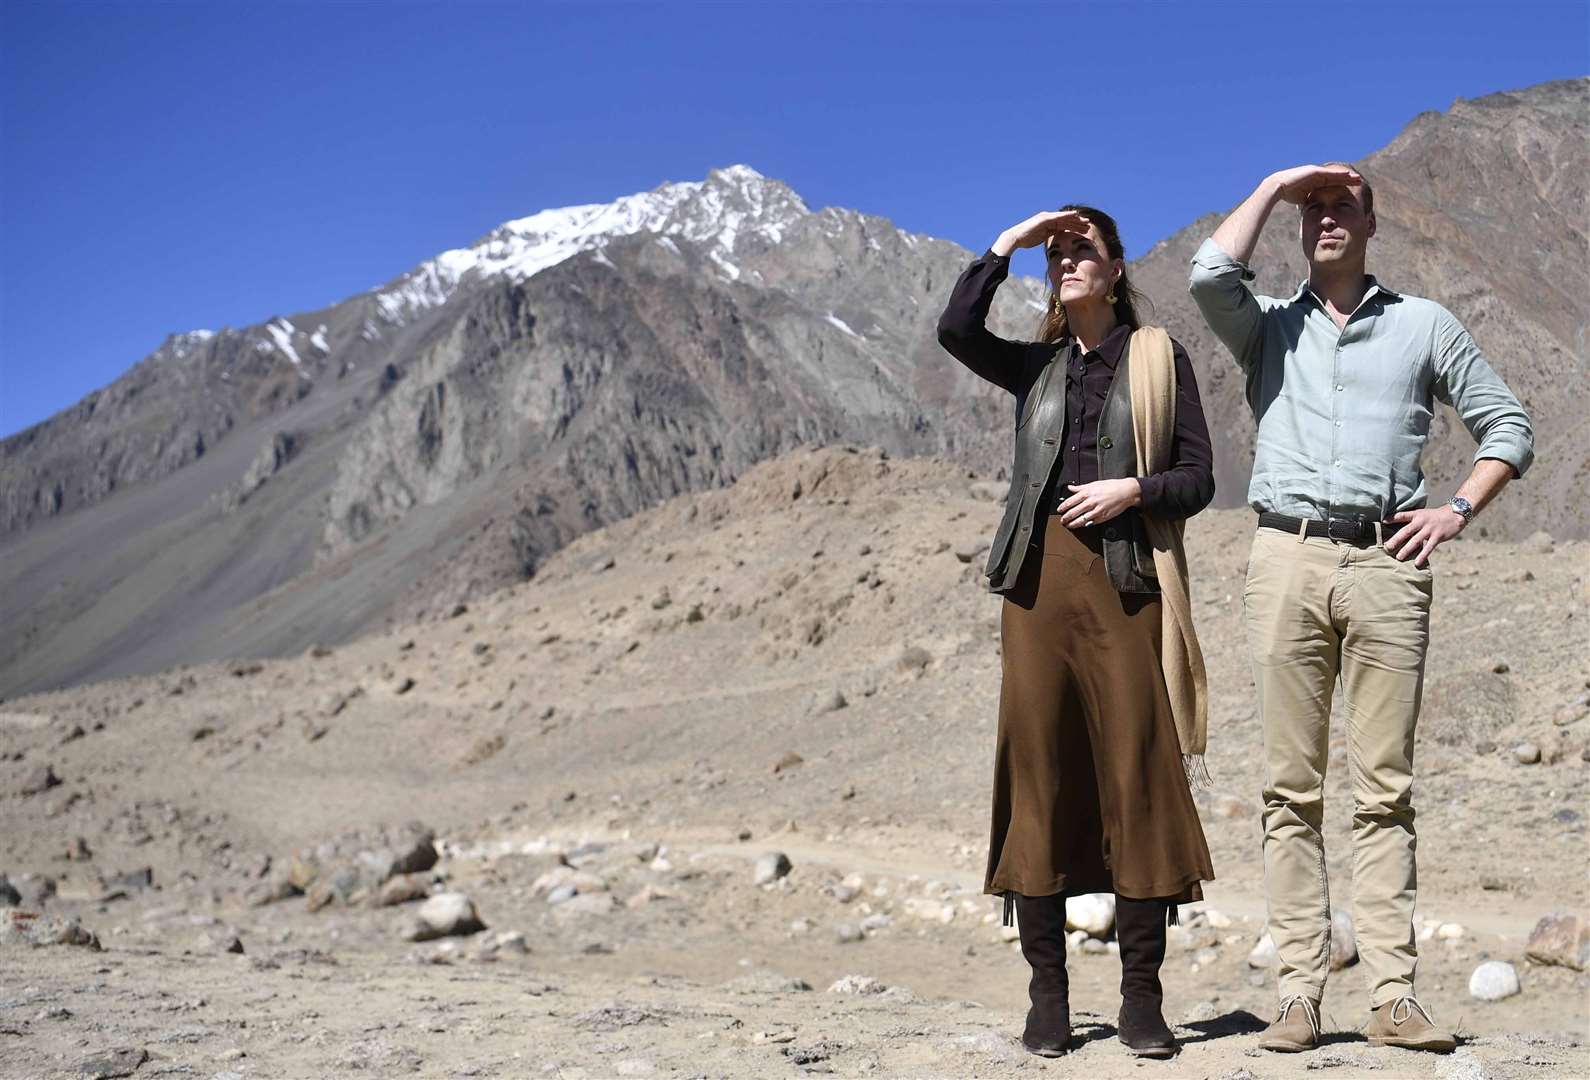 William and Kate saw climate change in progress during a visit to the Chiatibo glacier in Pakistan (Neil Hall/PA)